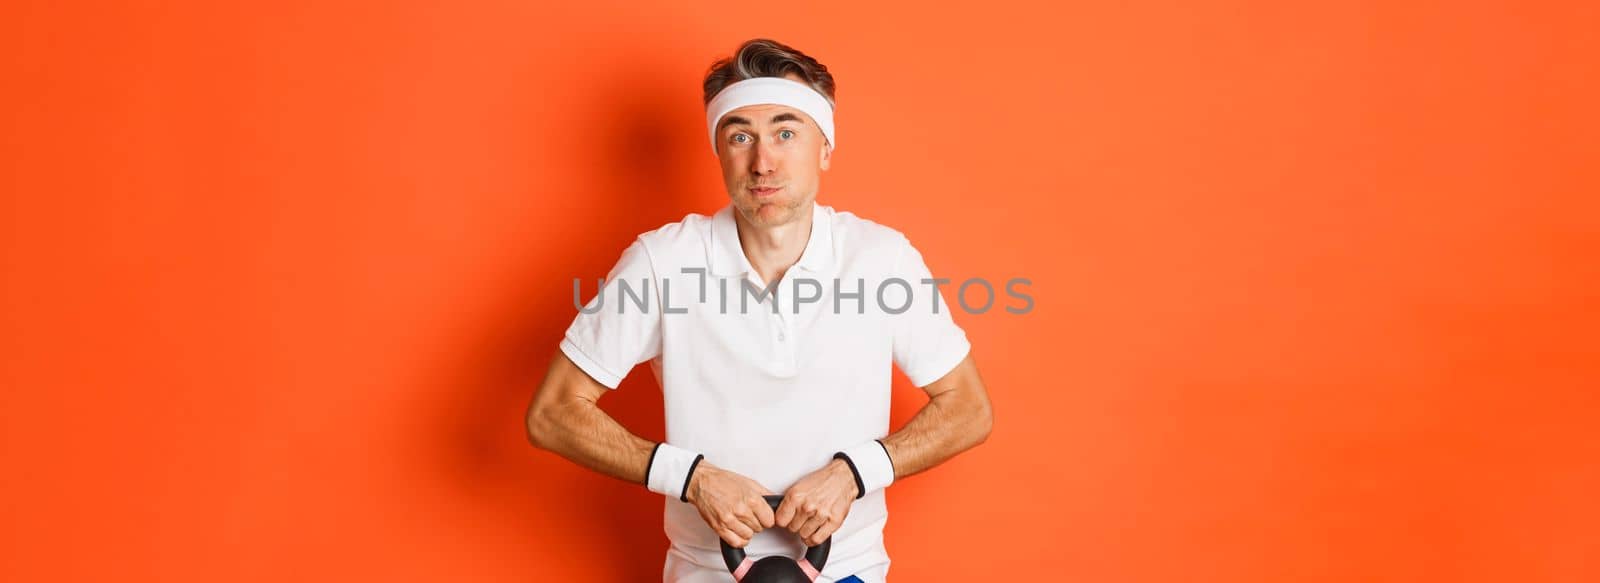 Concept of workout, gym and lifestyle. Image of handsome middle-aged guy doing sport exercises, lifting kettlebell with tensed expression, standing over orange background.